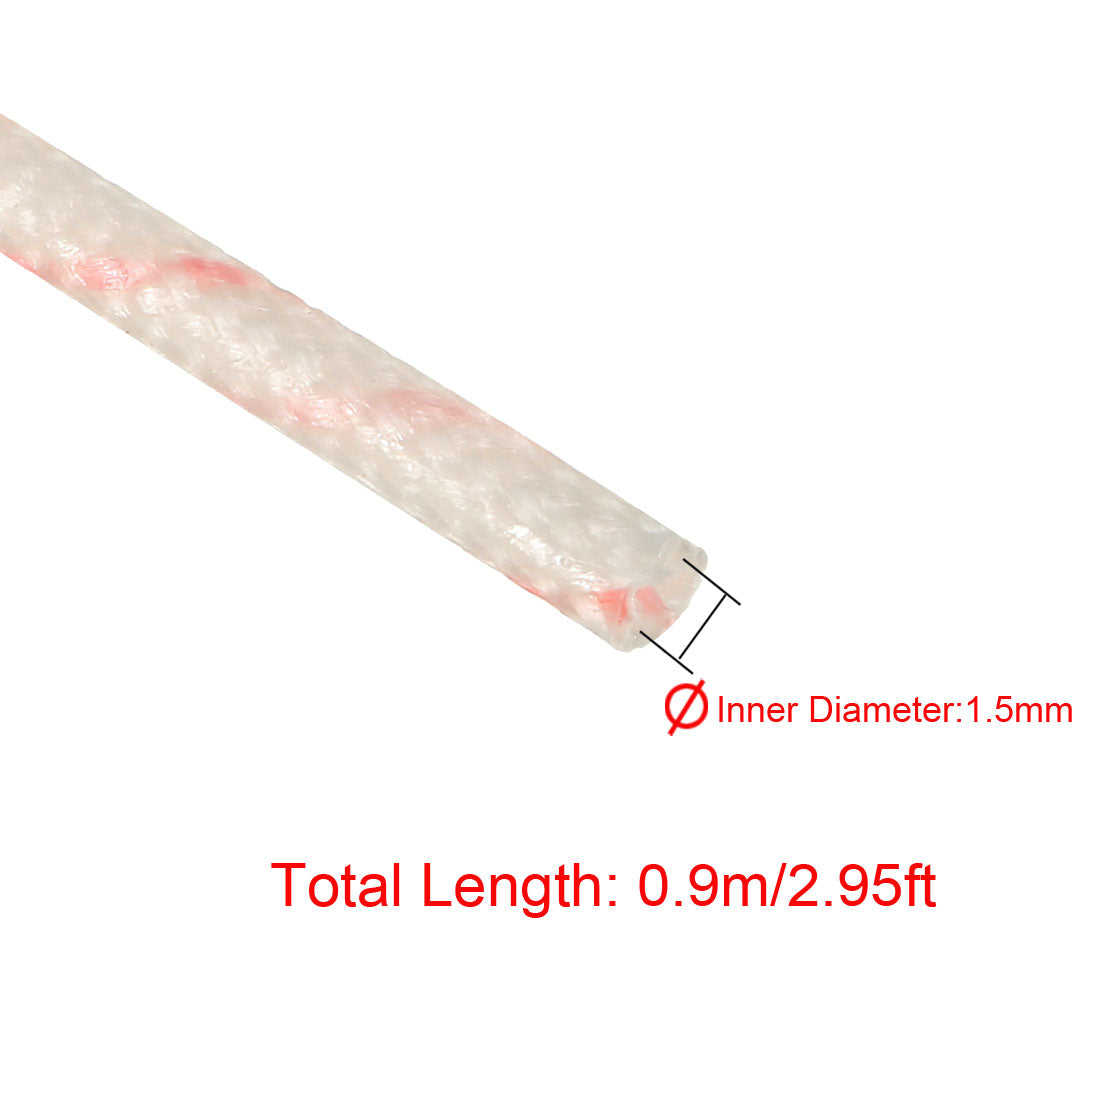 uxcell Uxcell Fiberglass Sleeve 1.5mm I.D. PVC Insulation Tubing 1500V Tube Adjustable Sleeving Pipe 125 Degree Centigrade Cable Wrap Wire 900mm 2.95ft 5Pcs